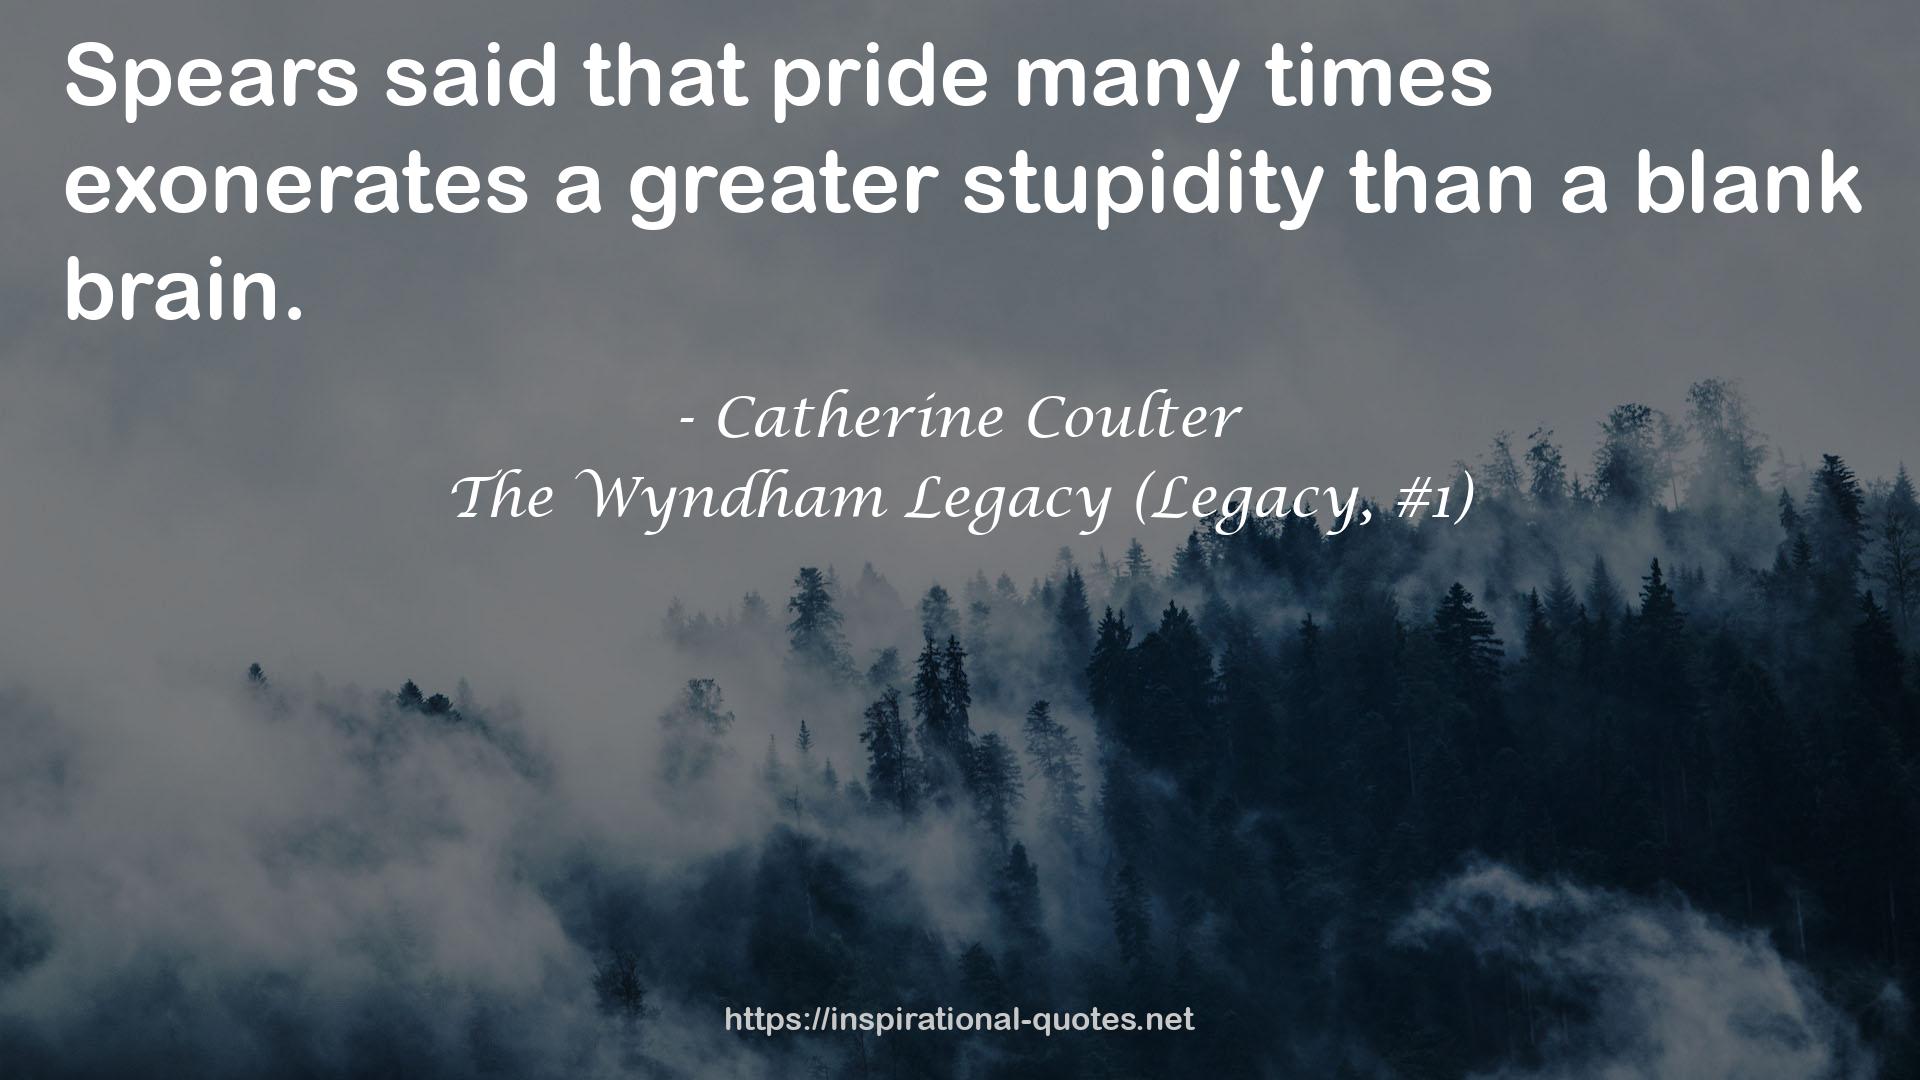 The Wyndham Legacy (Legacy, #1) QUOTES